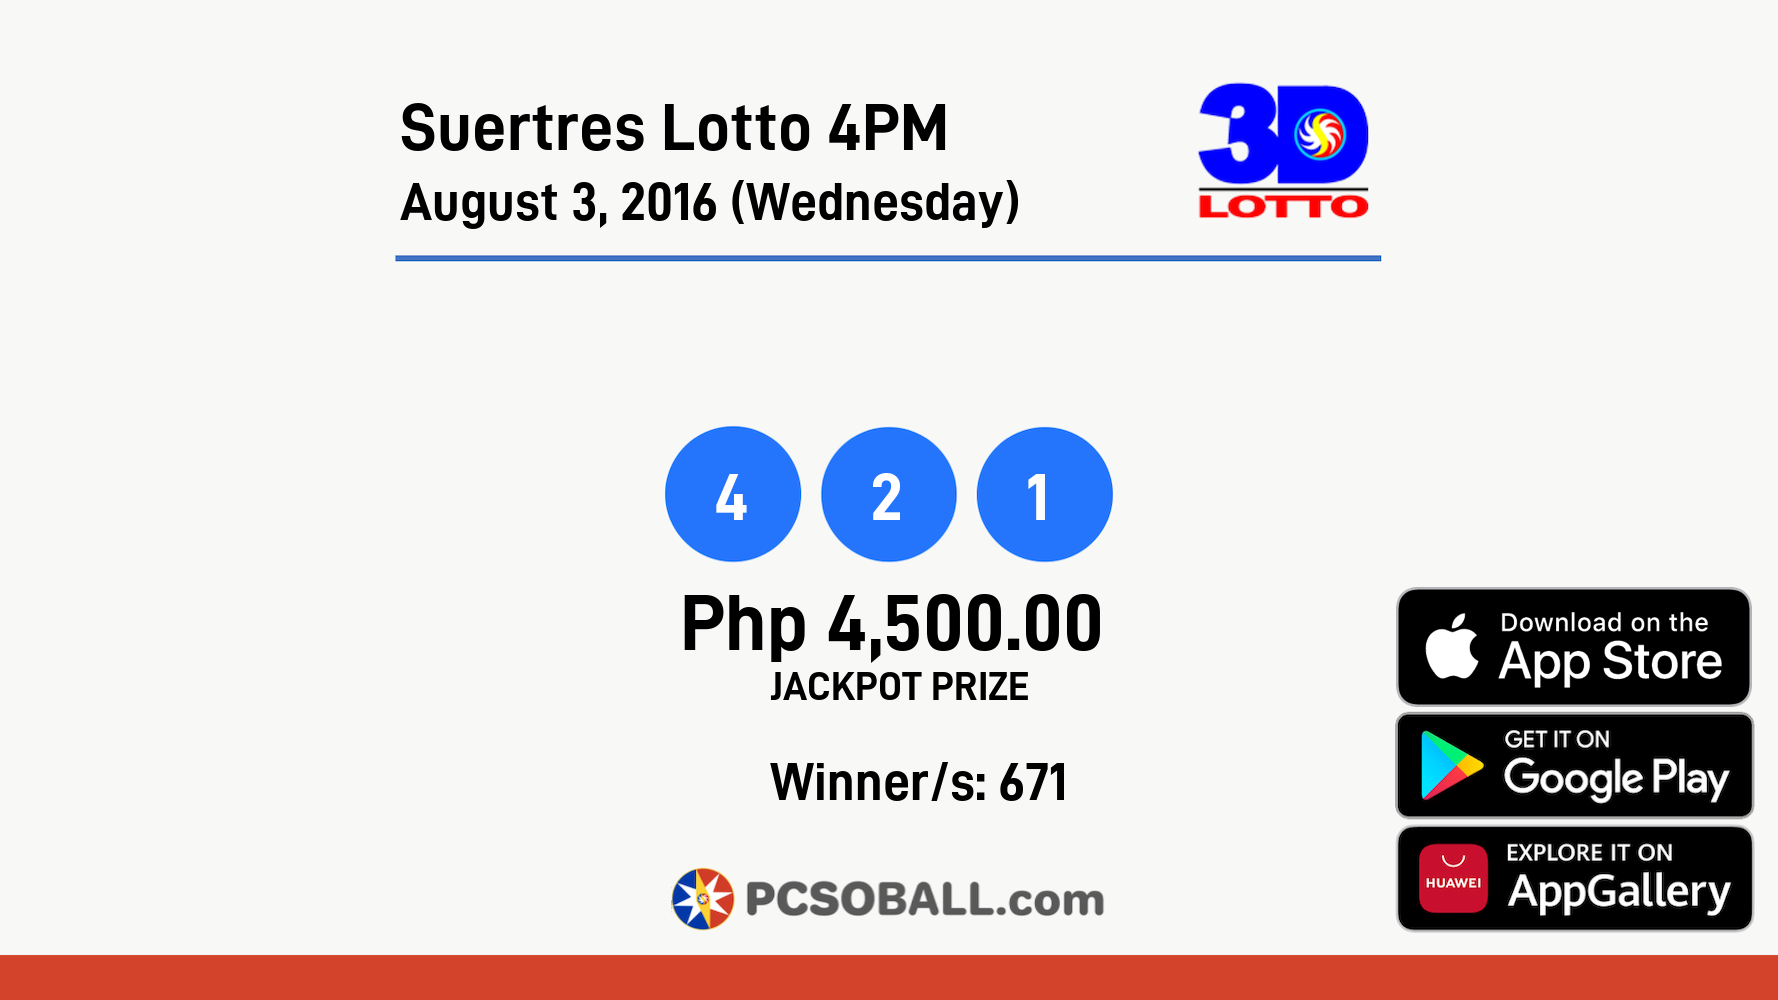 Suertres Lotto 4PM August 3, 2016 (Wednesday) Result